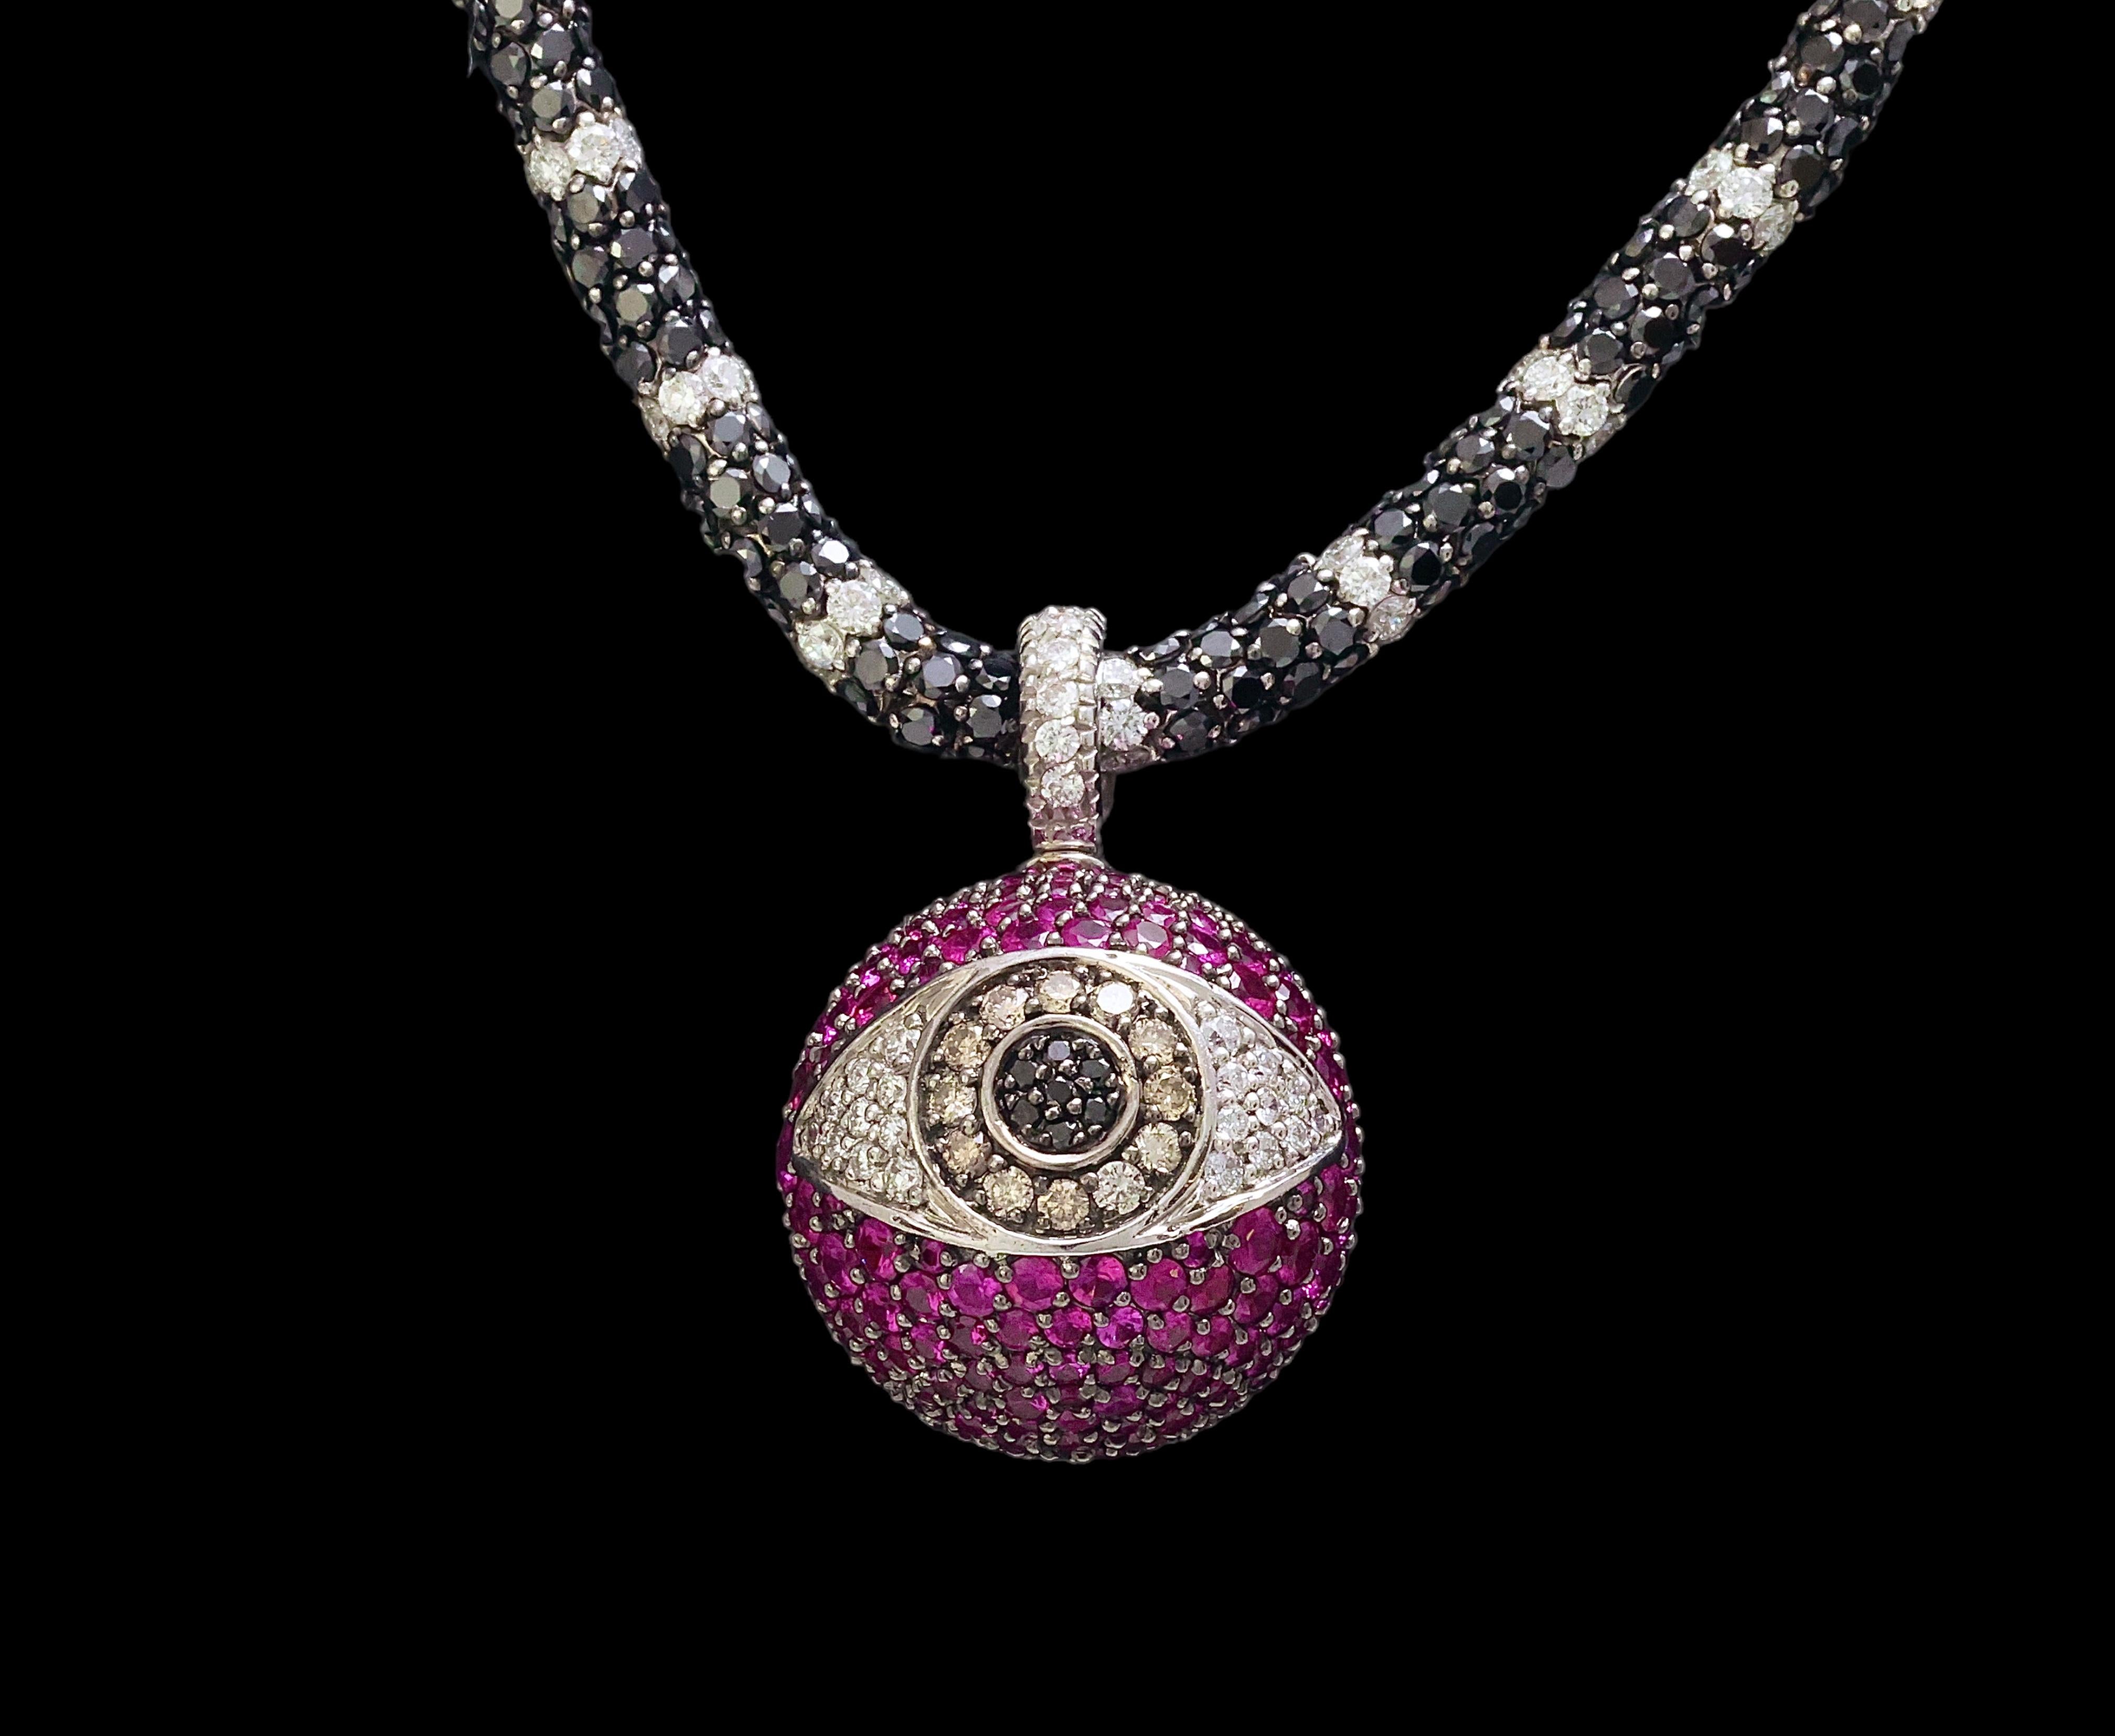 18 Kt Gold Necklace & Pendant With 30 ct. Black & White Diamonds & Rubies For Sale 8